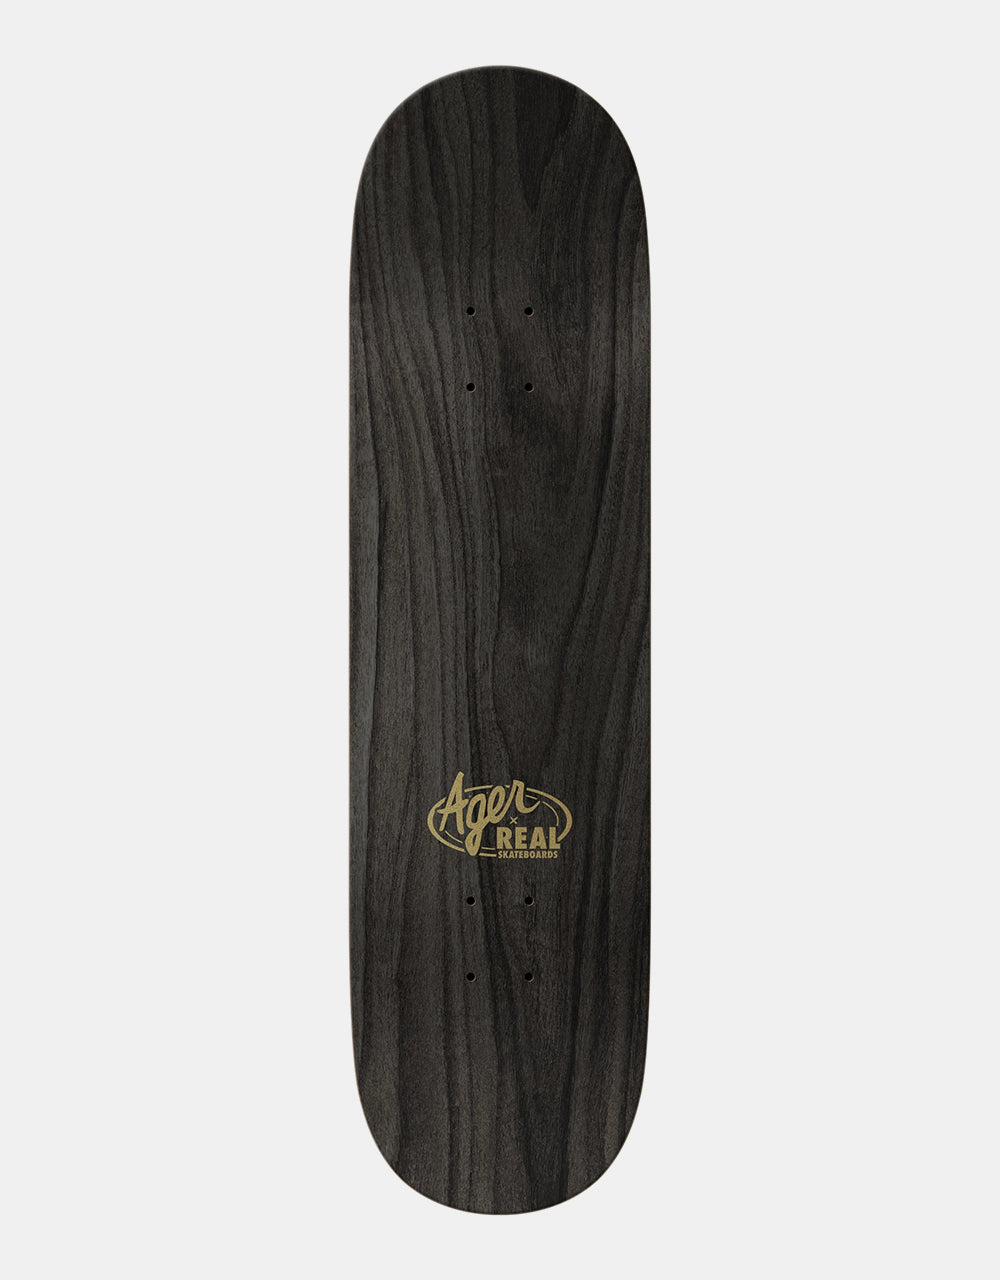 Real Lintell By Kathy Ager Skateboard Deck - 8.5"